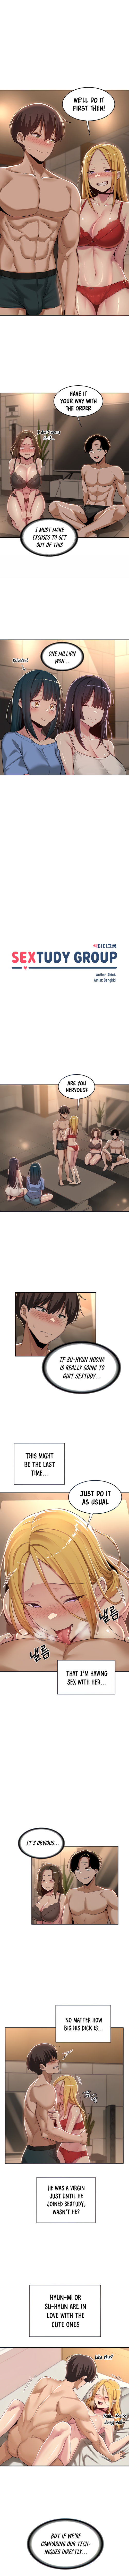 Panel Image 1 for chapter 49 of manhwa Sex Study Group on read.oppai.stream